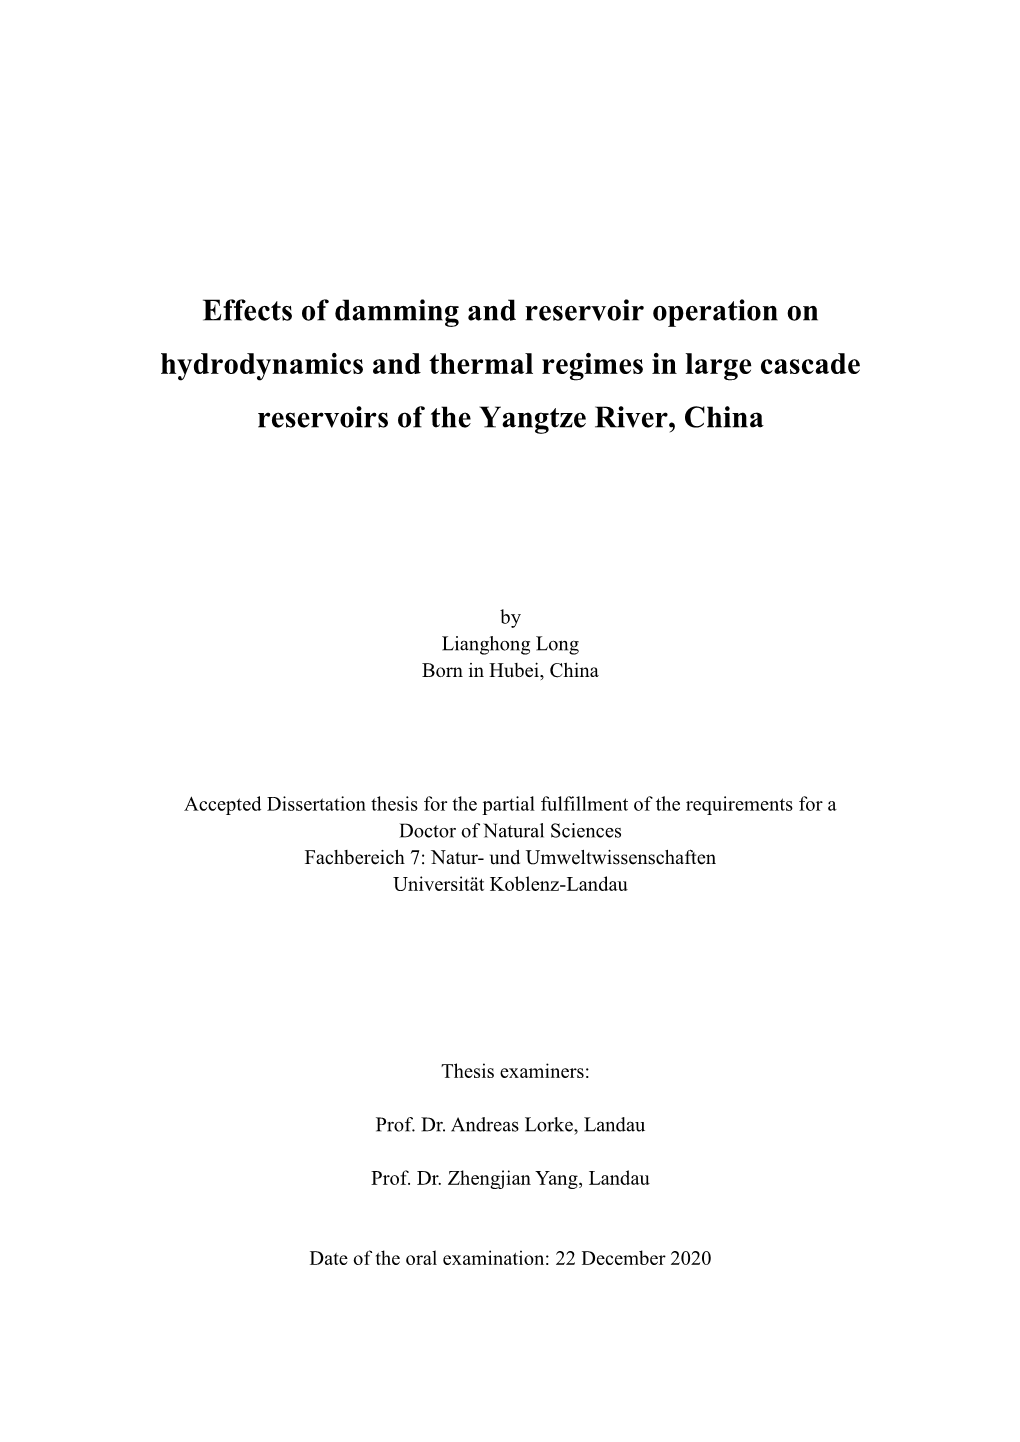 Effects of Damming and Reservoir Operation on Hydrodynamics and Thermal Regimes in Large Cascade Reservoirs of the Yangtze River, China